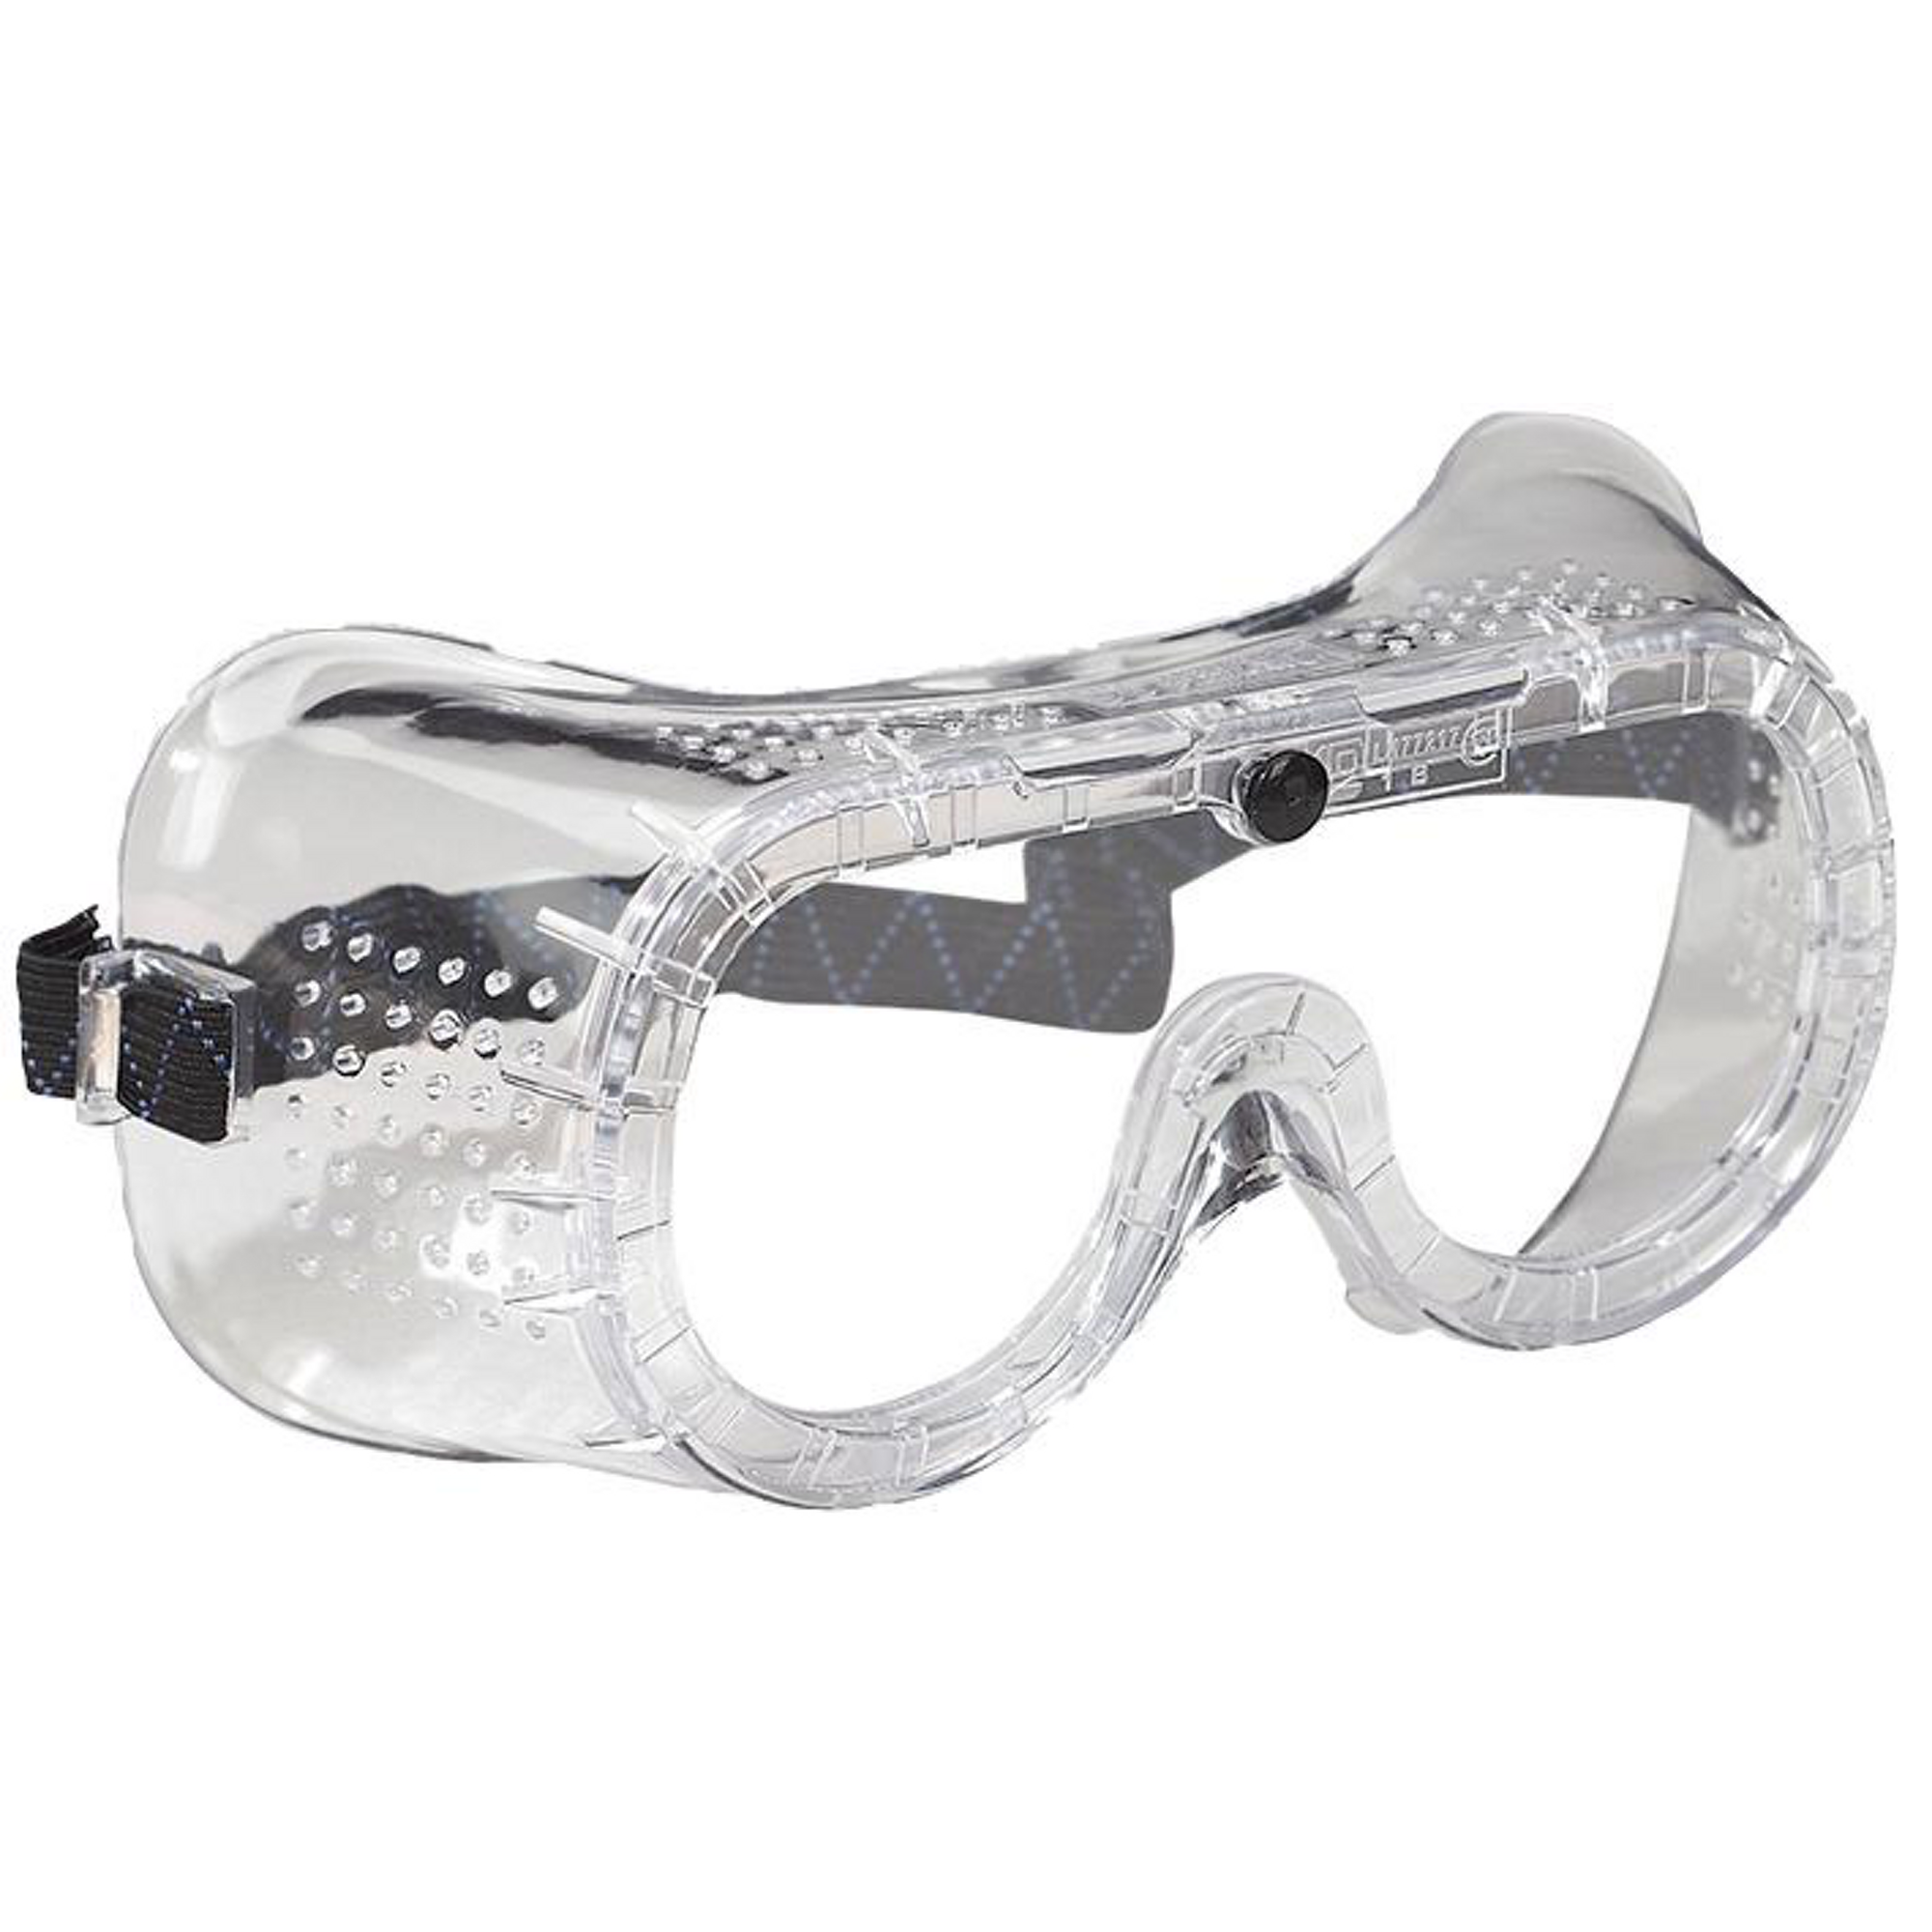 Junior Safety Goggles